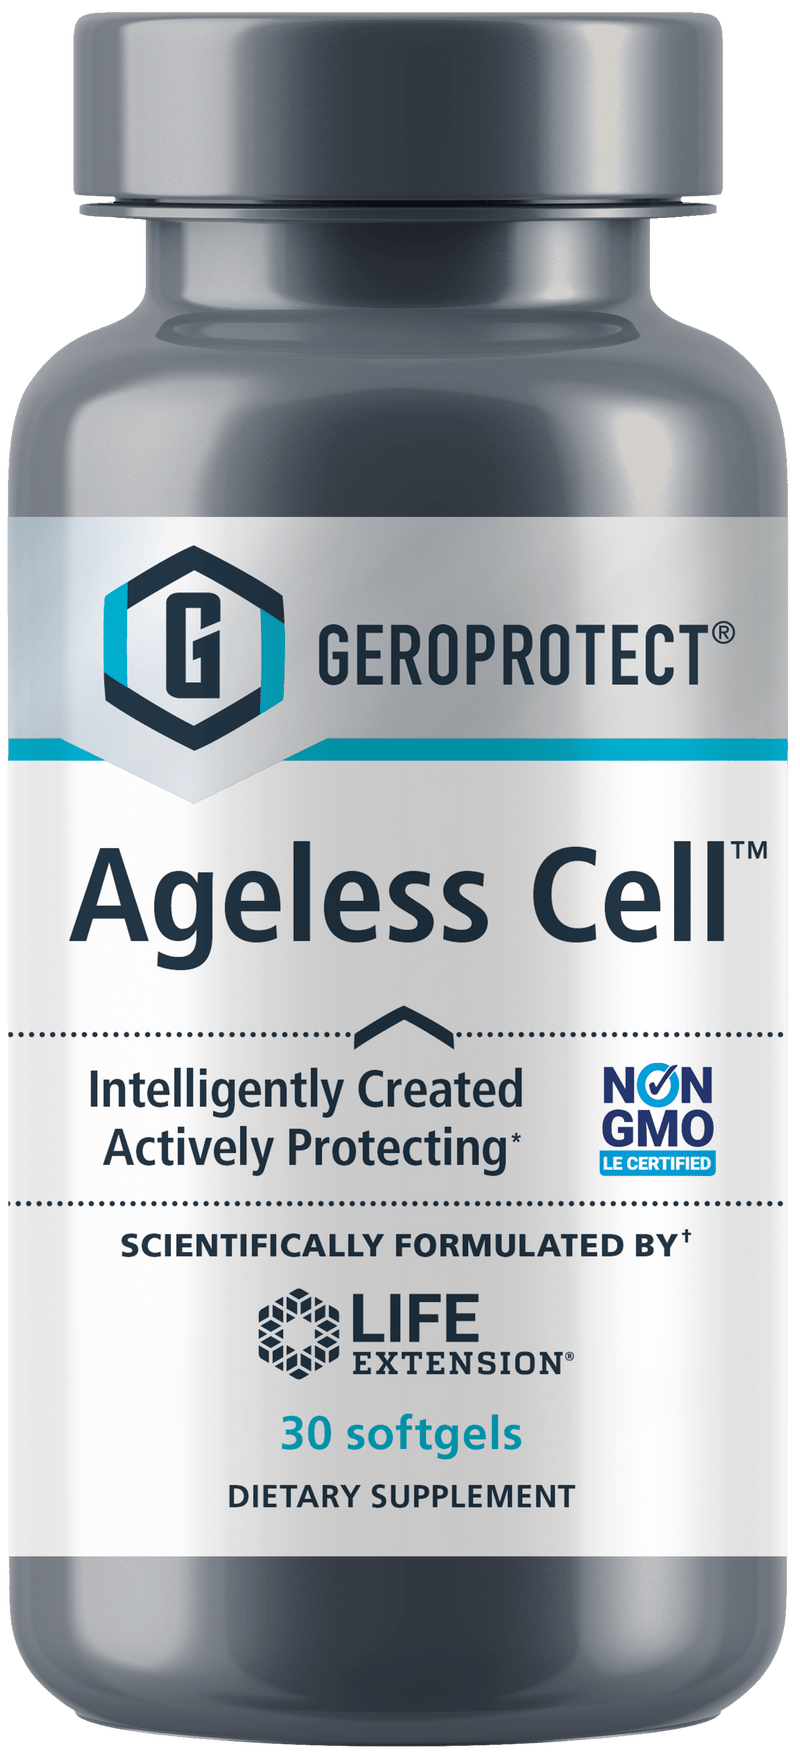 Life Extension Geroprotect Ageless Cell -- 30 Softgels